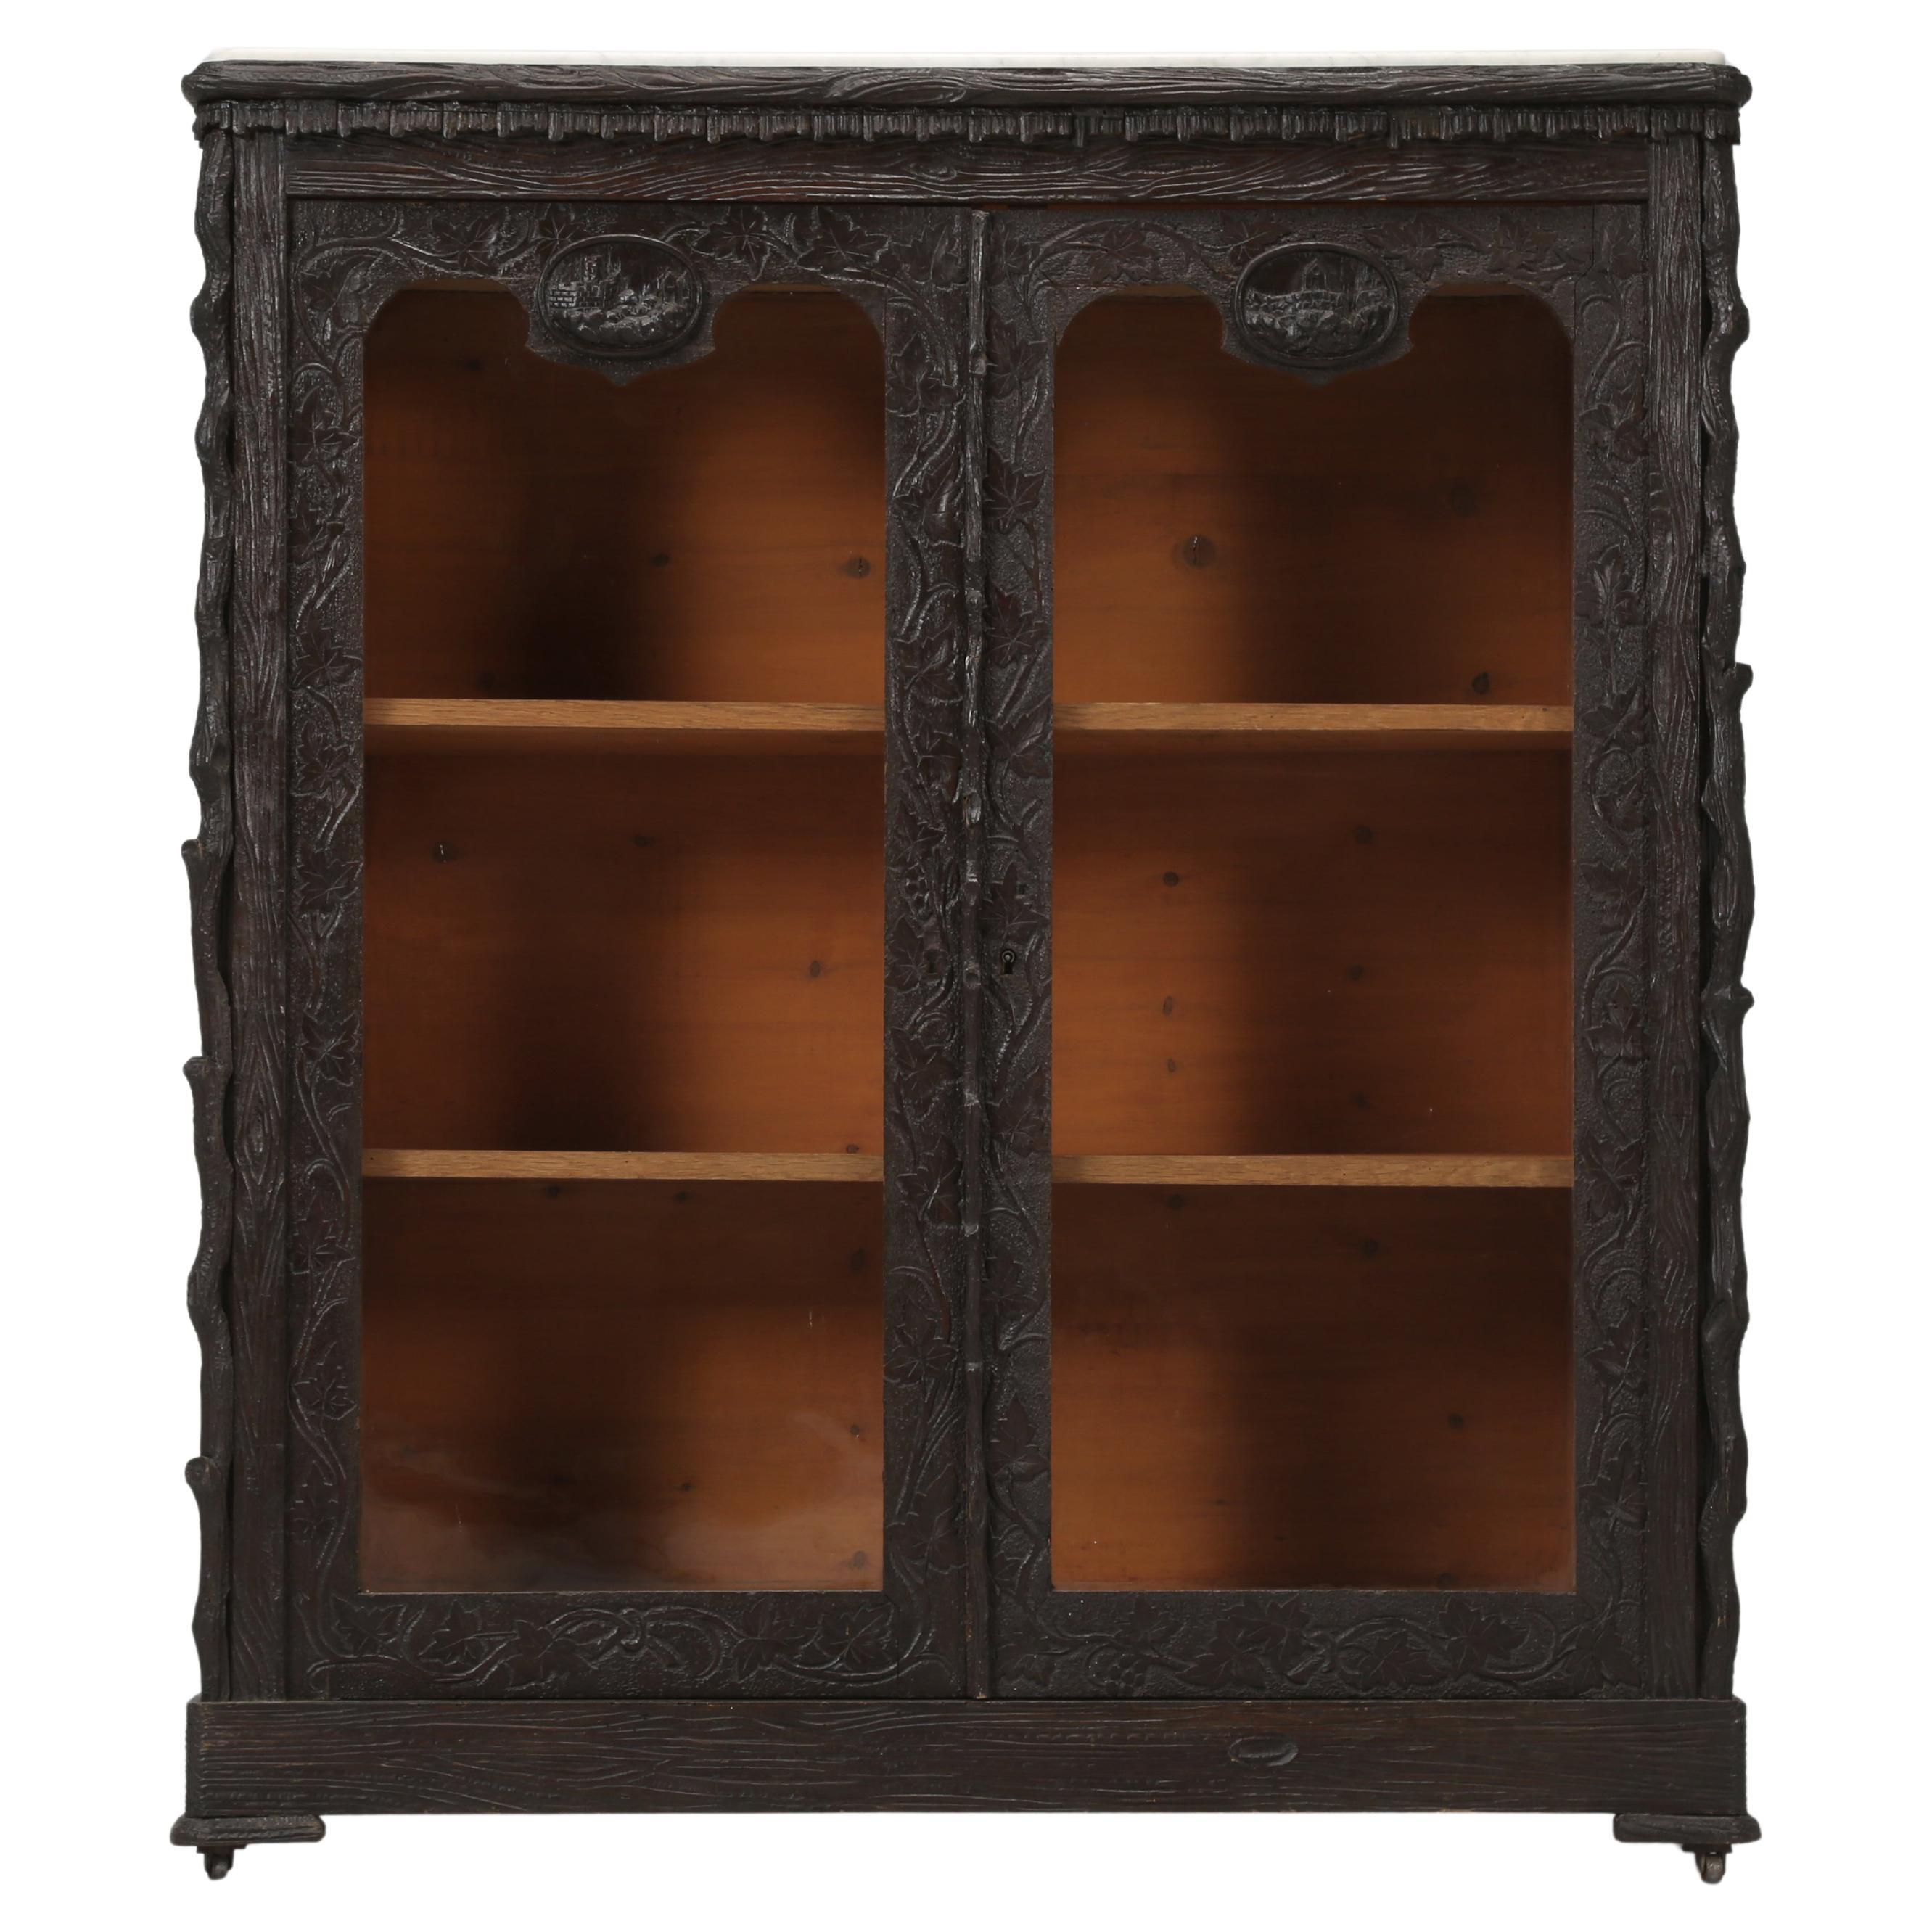 Antique Black Forest Bookcase or China Cabinet, Swiss, Late 1800's Part of Suite For Sale